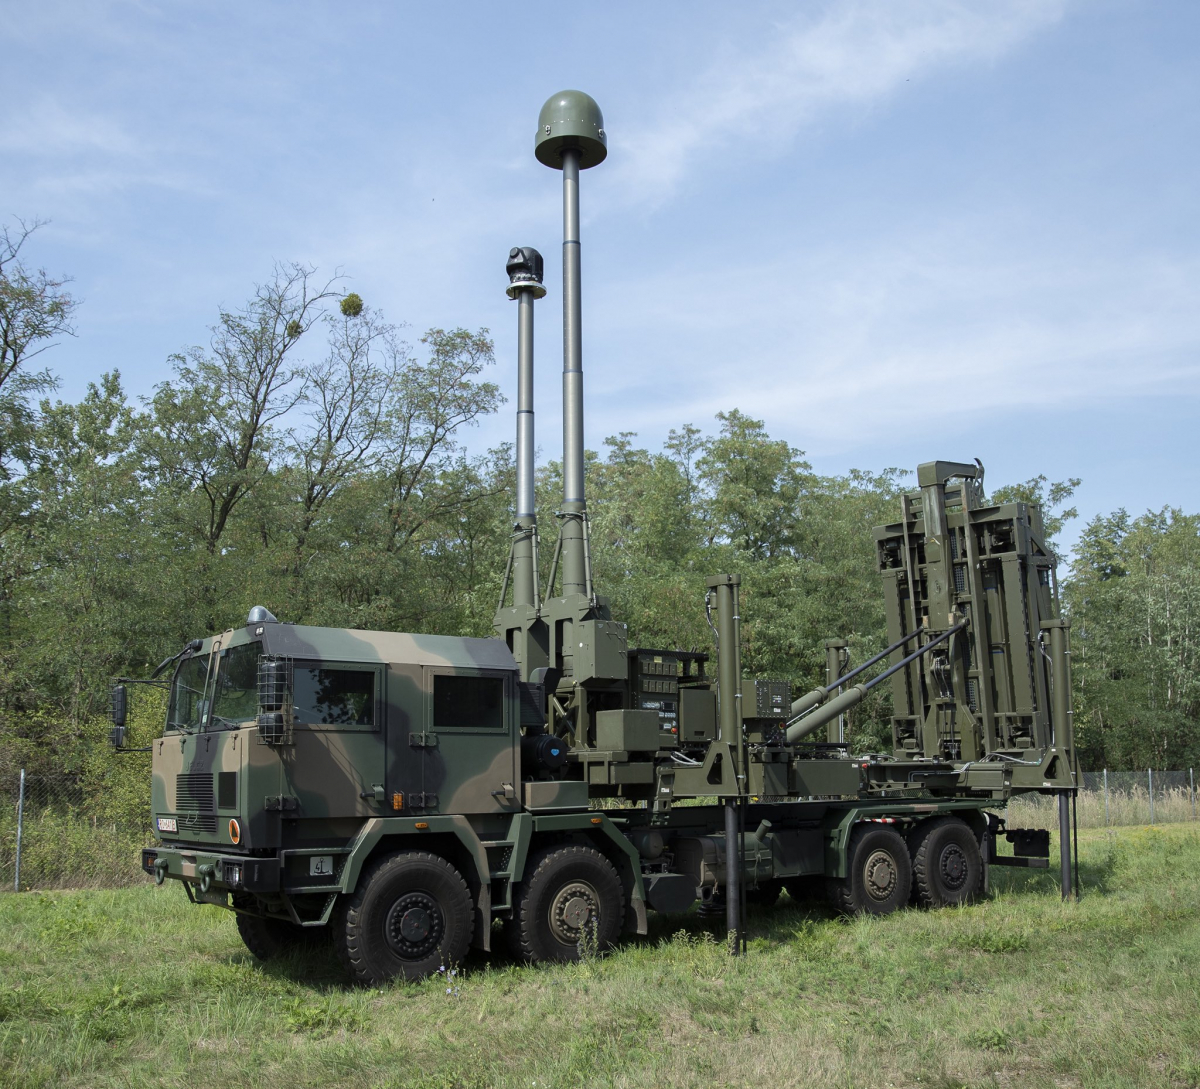 The Polish Army has already trained on two Narew short-range anti-aircraft systems